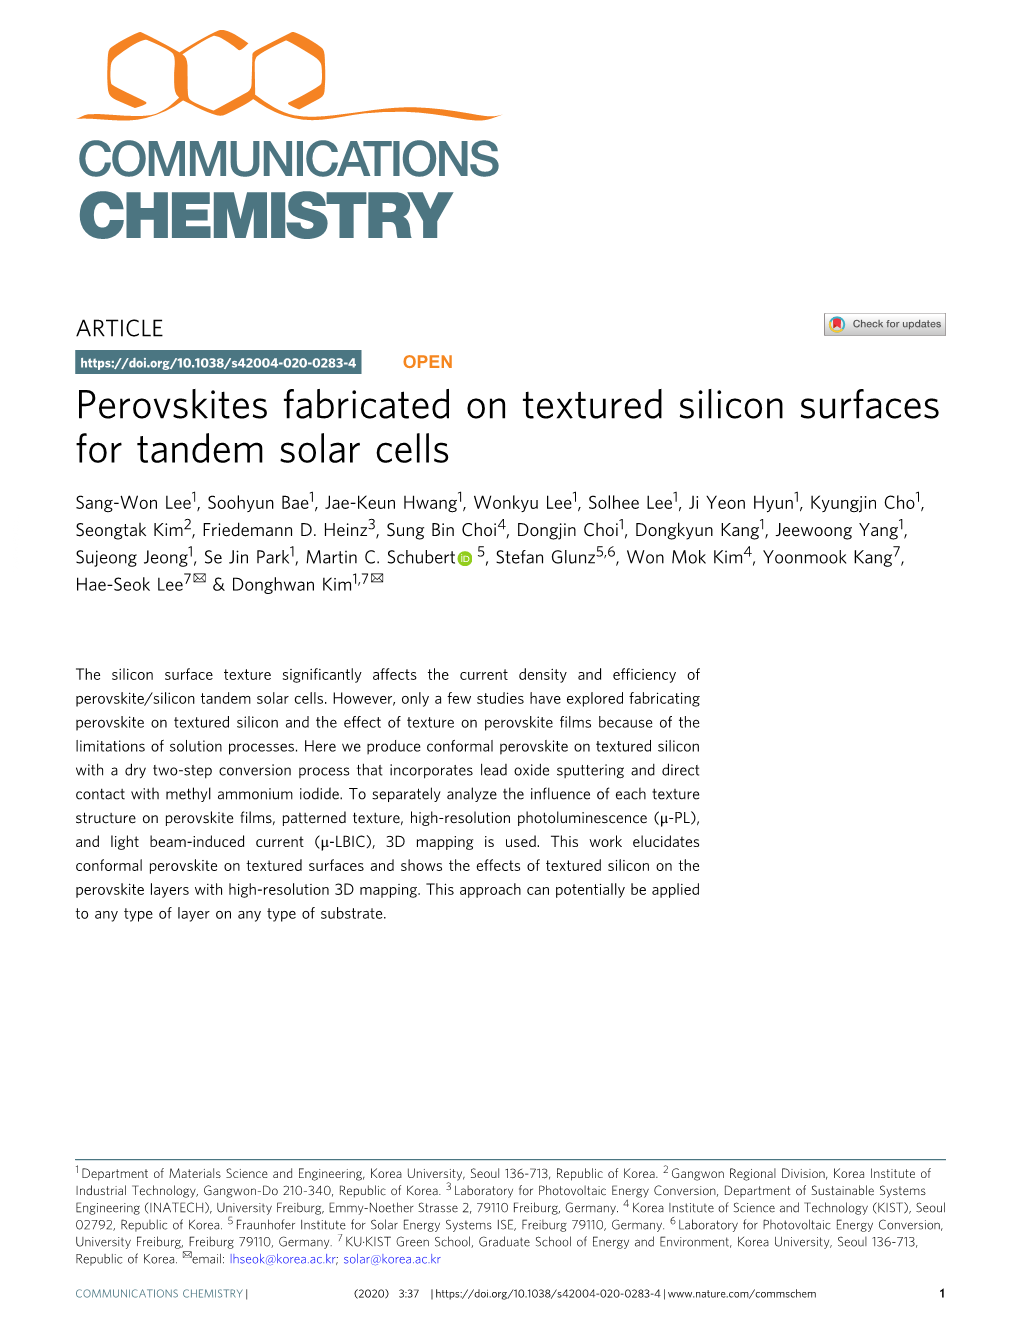 Perovskites Fabricated on Textured Silicon Surfaces for Tandem Solar Cells